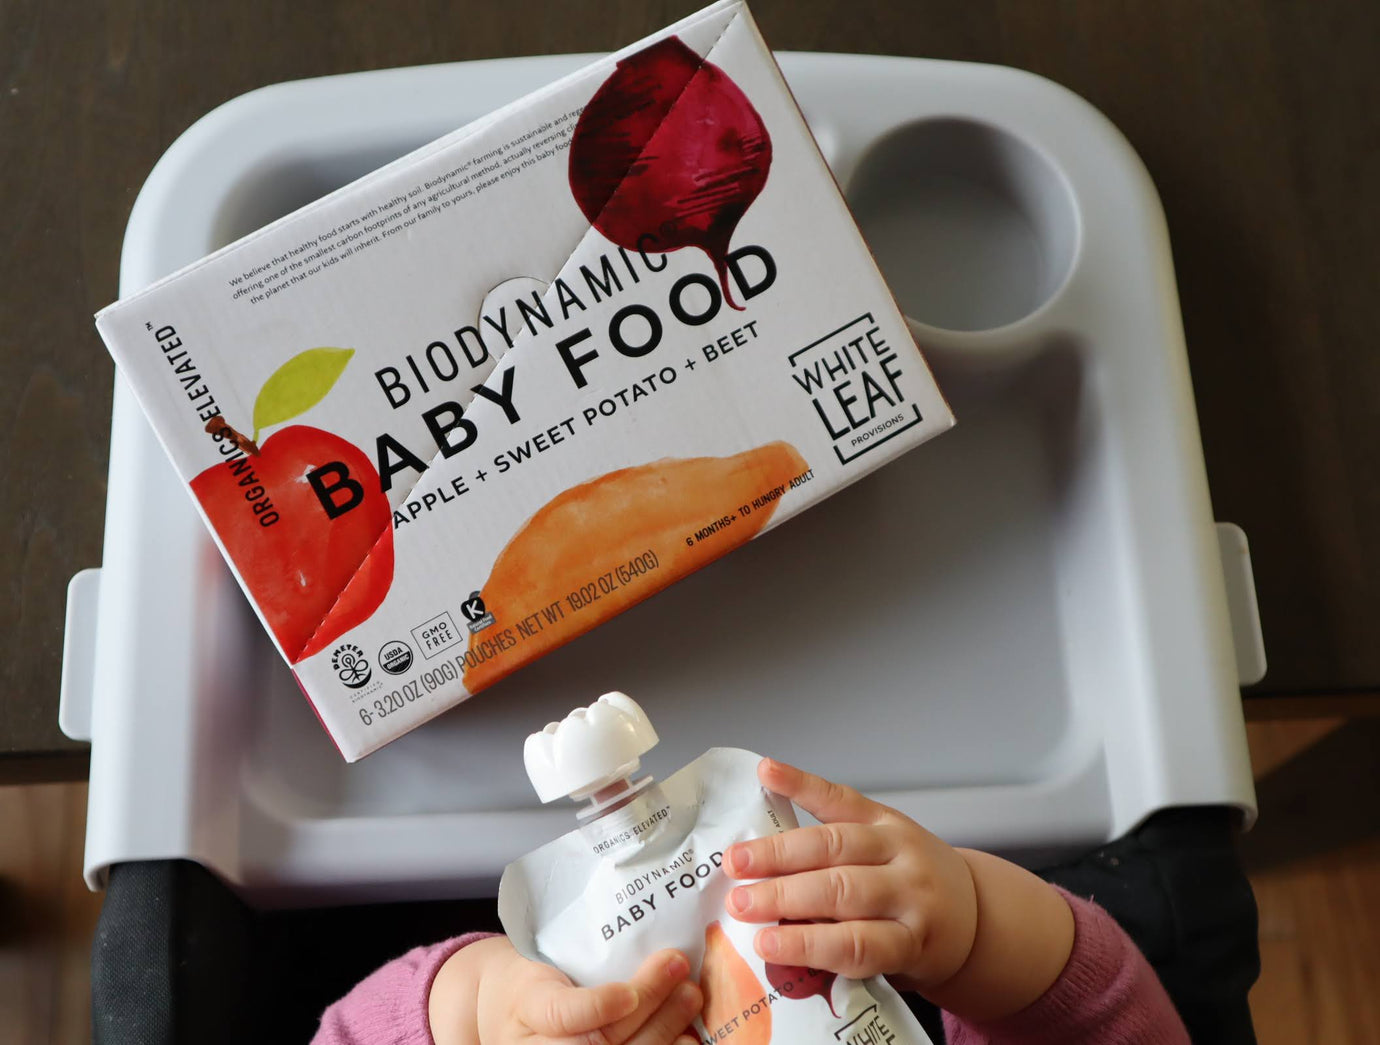 Best Advice for Baby’s First Foods, and the Importance of Avoiding Added Sugars and Sodium